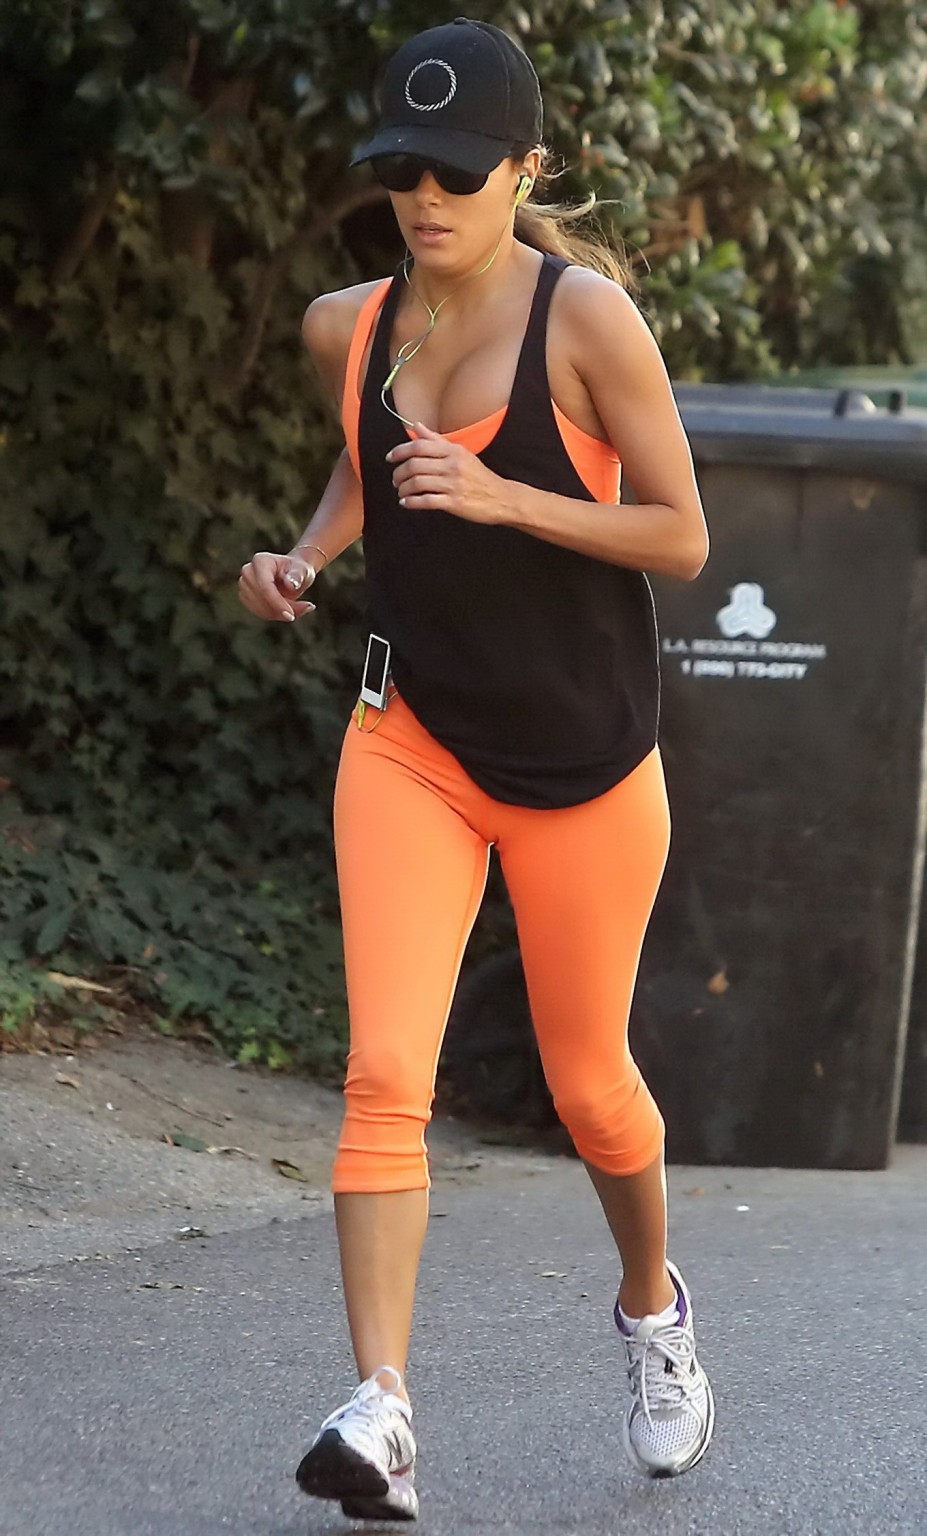 Eva Longoria jogging in tight sports outfit showing cleavage, ass  cameltoe out  #75213910